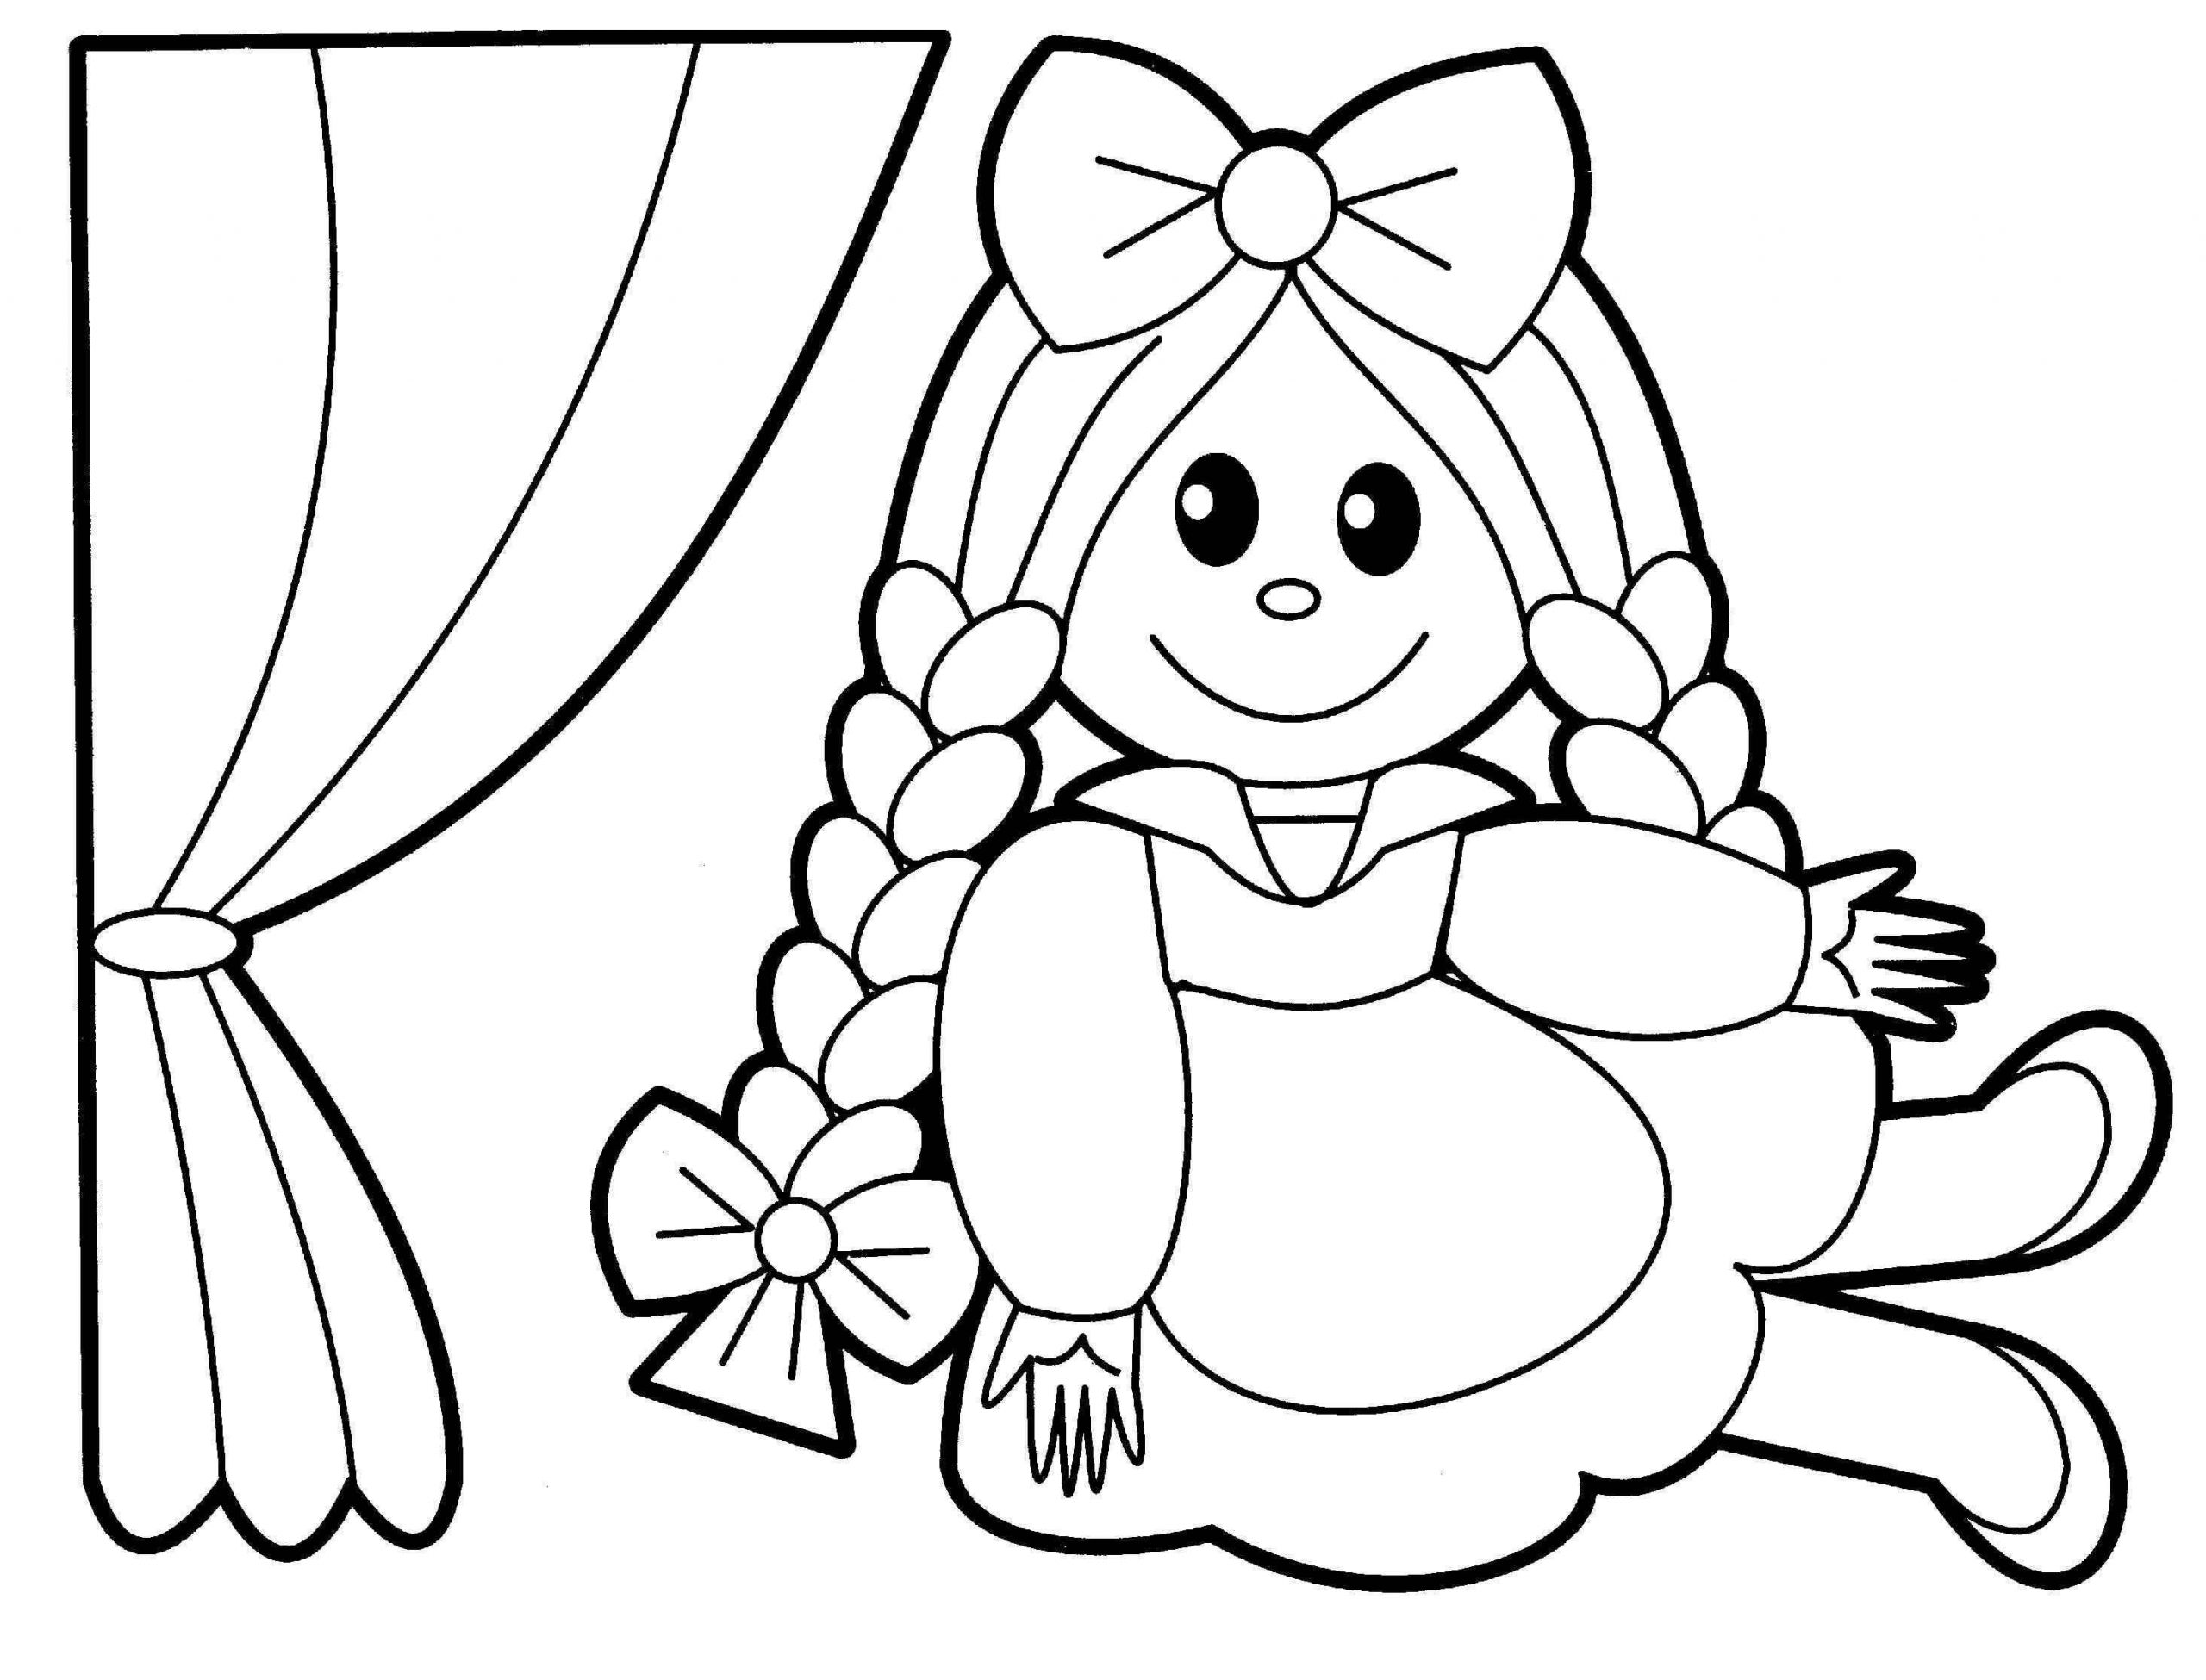 Baby Alive Coloring Page
 Baby Alive Coloring Pages Lovely Coloring Pages Baby Dolls